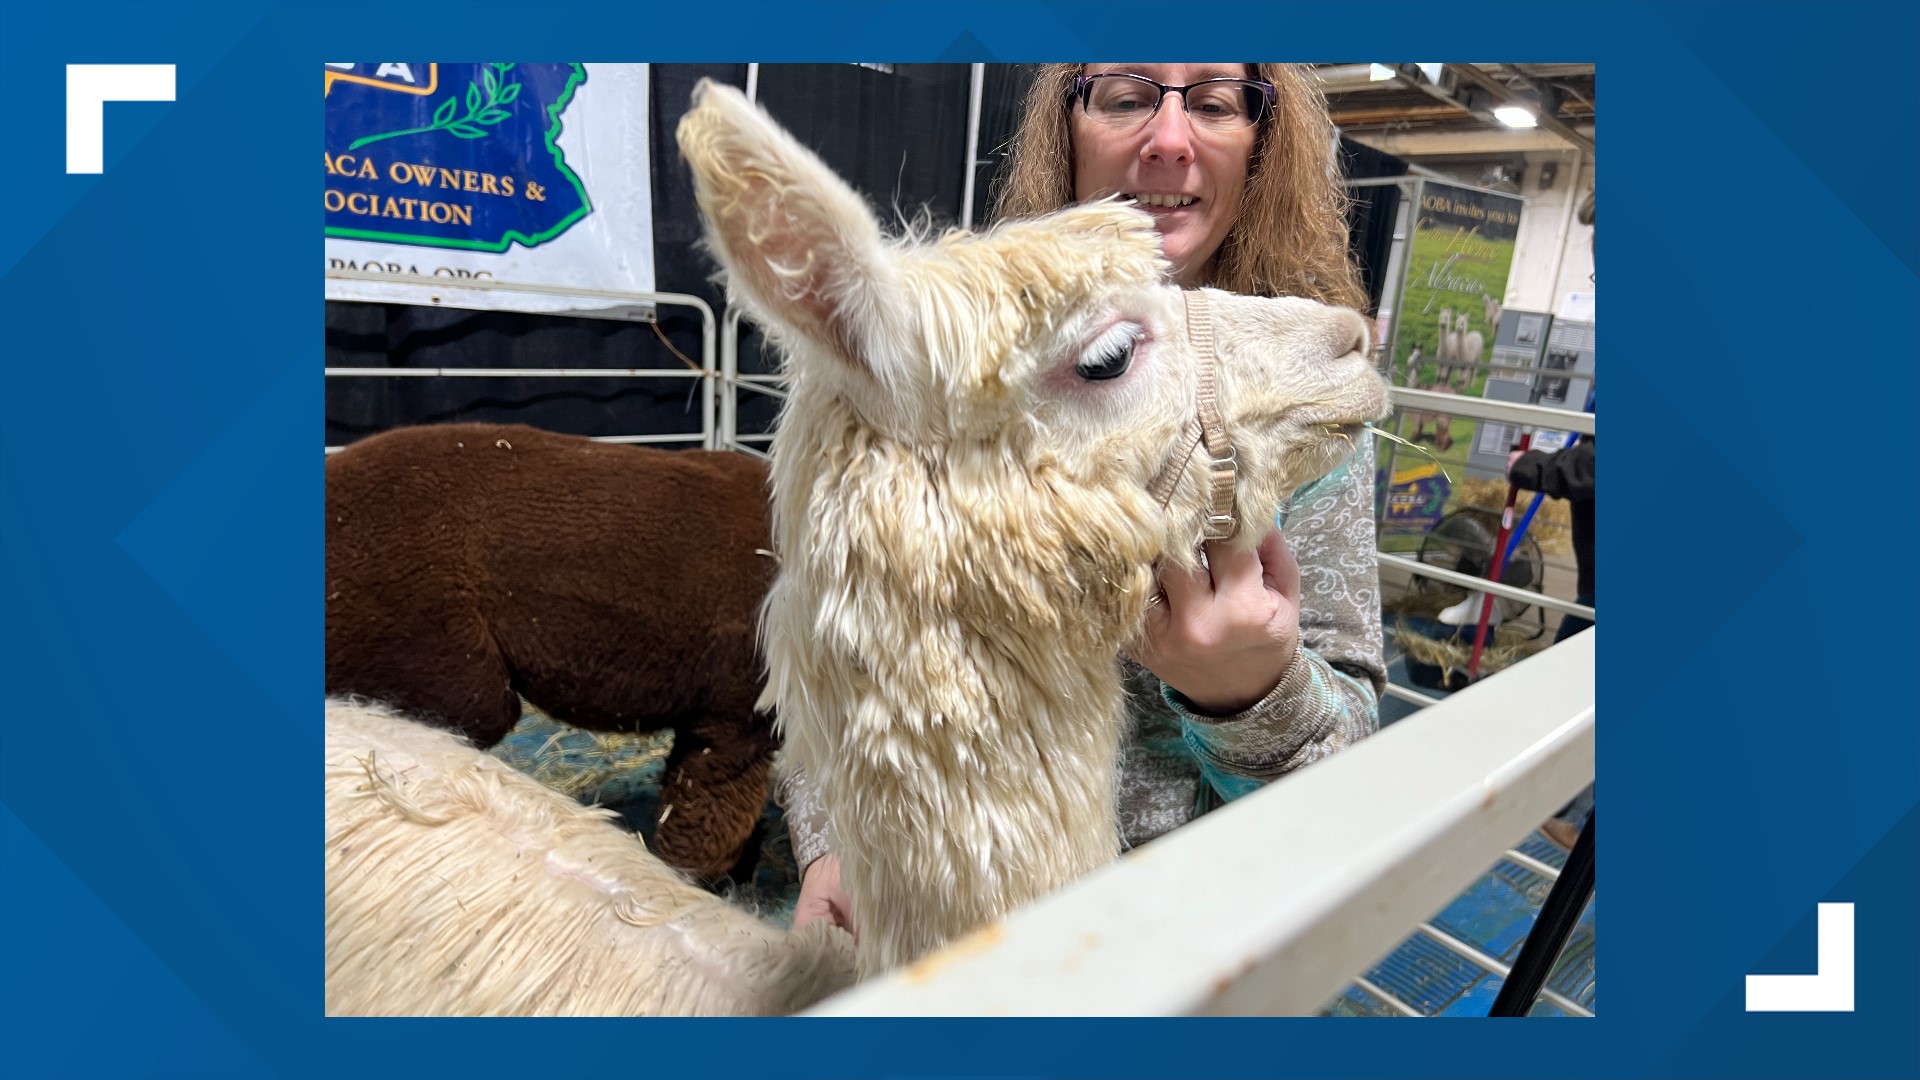 The Pennsylvania Alpaca Owners & Breeders Association partnered with a number of farms for the 2023 Pa. Farm Show. This year, Pine Bent Farms was at the Farm Show.